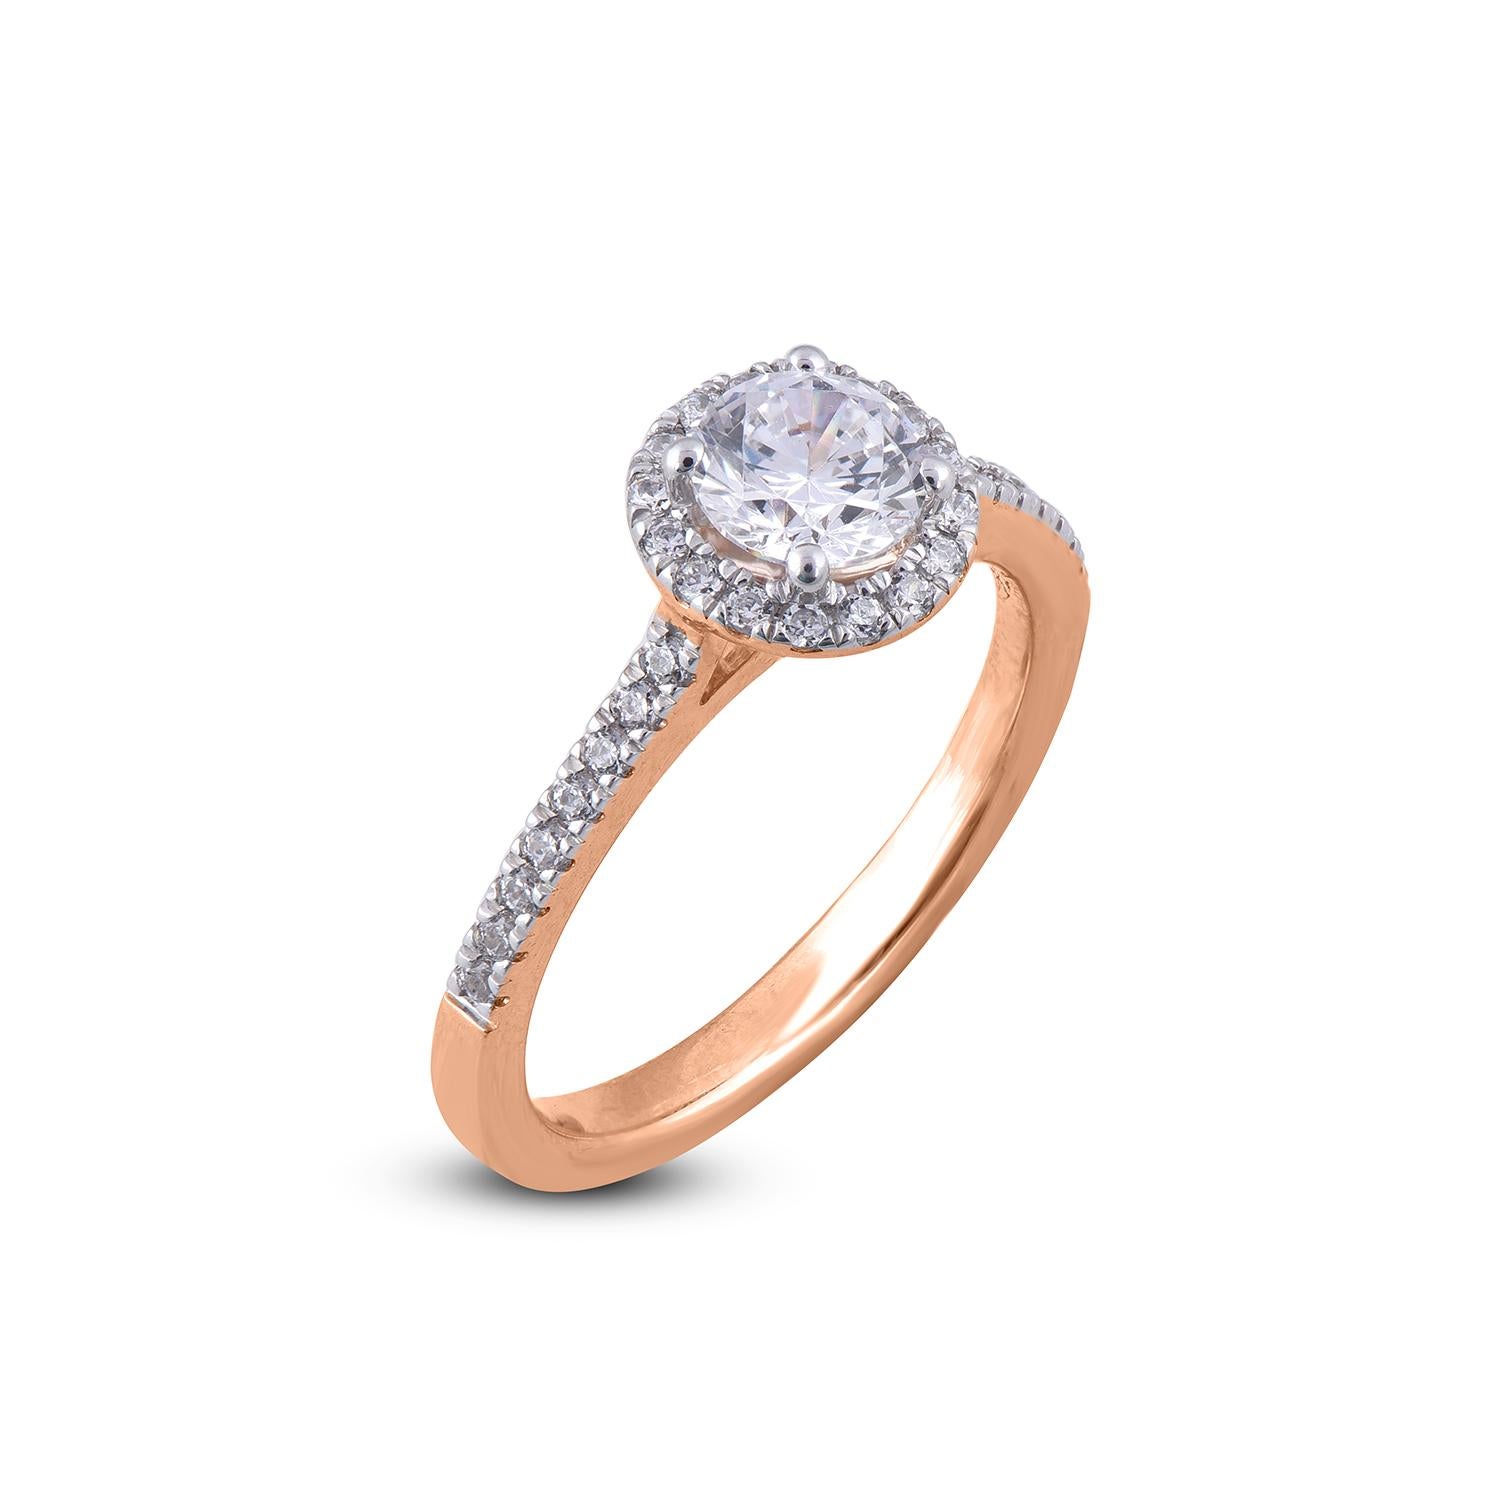 A graceful addition to her wardrobe, this design crafted in 18 Karat Rose gold and it's features 0.75ct of centre stone and 0.25 ct of frame and shank lined 33 round and diamond set in prong setting. The diamond are natural, not treated and dazzles